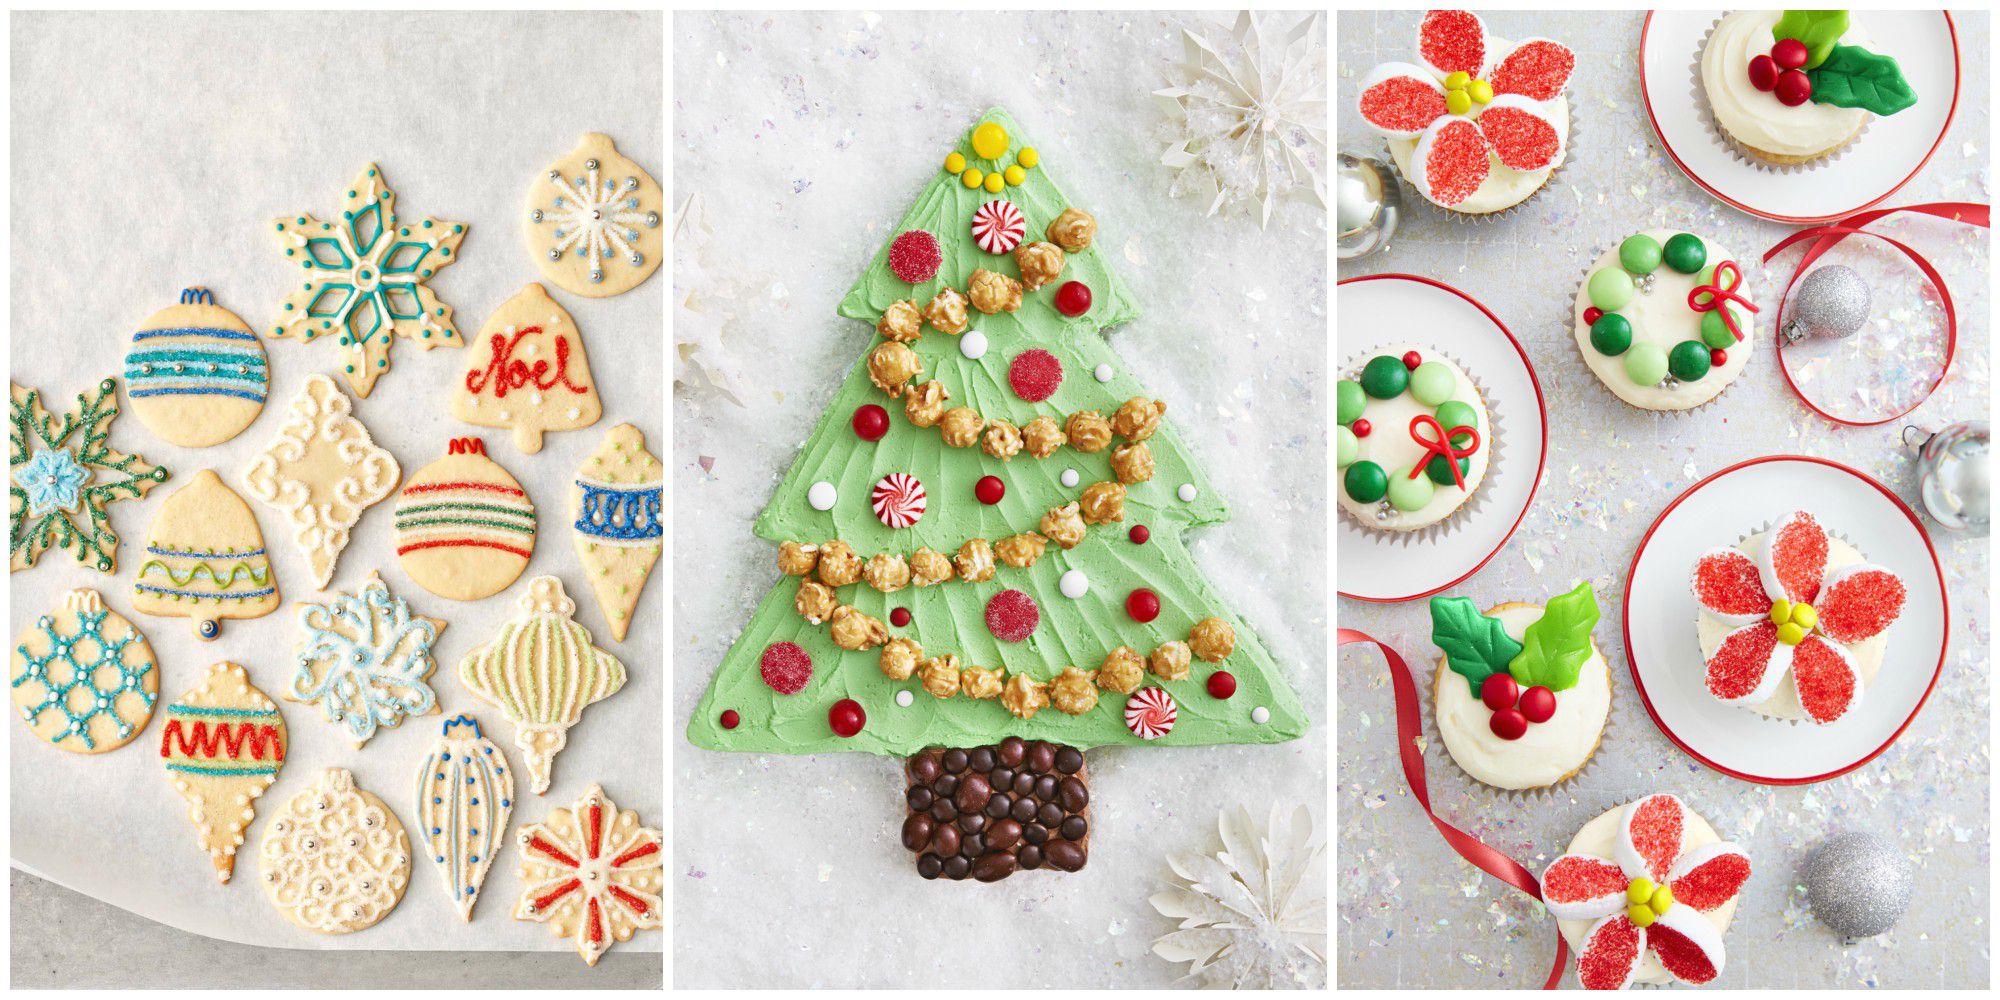 48 Easy Christmas Desserts - Best Recipes and Ideas for Christmas ...